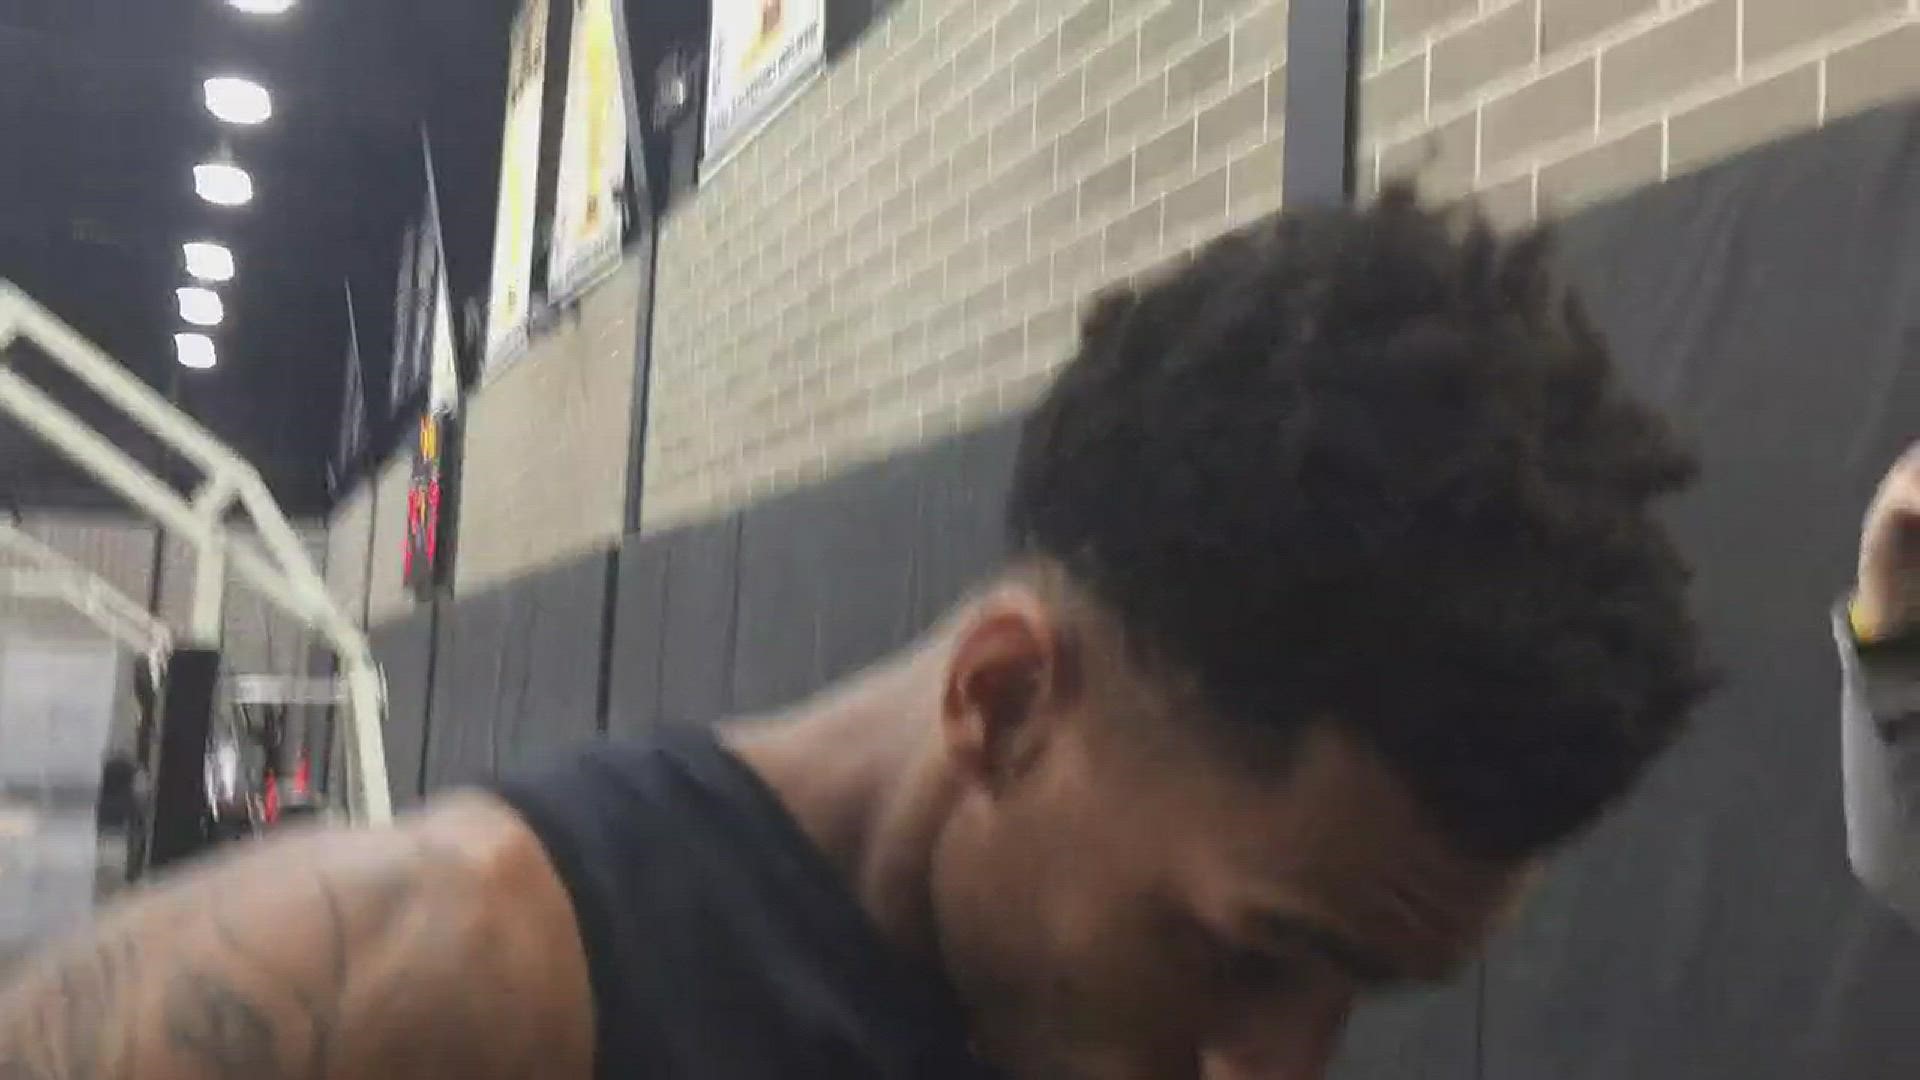 Spurs point guard Dejounte Murray talks about Saturday night's game against the Timberwolves